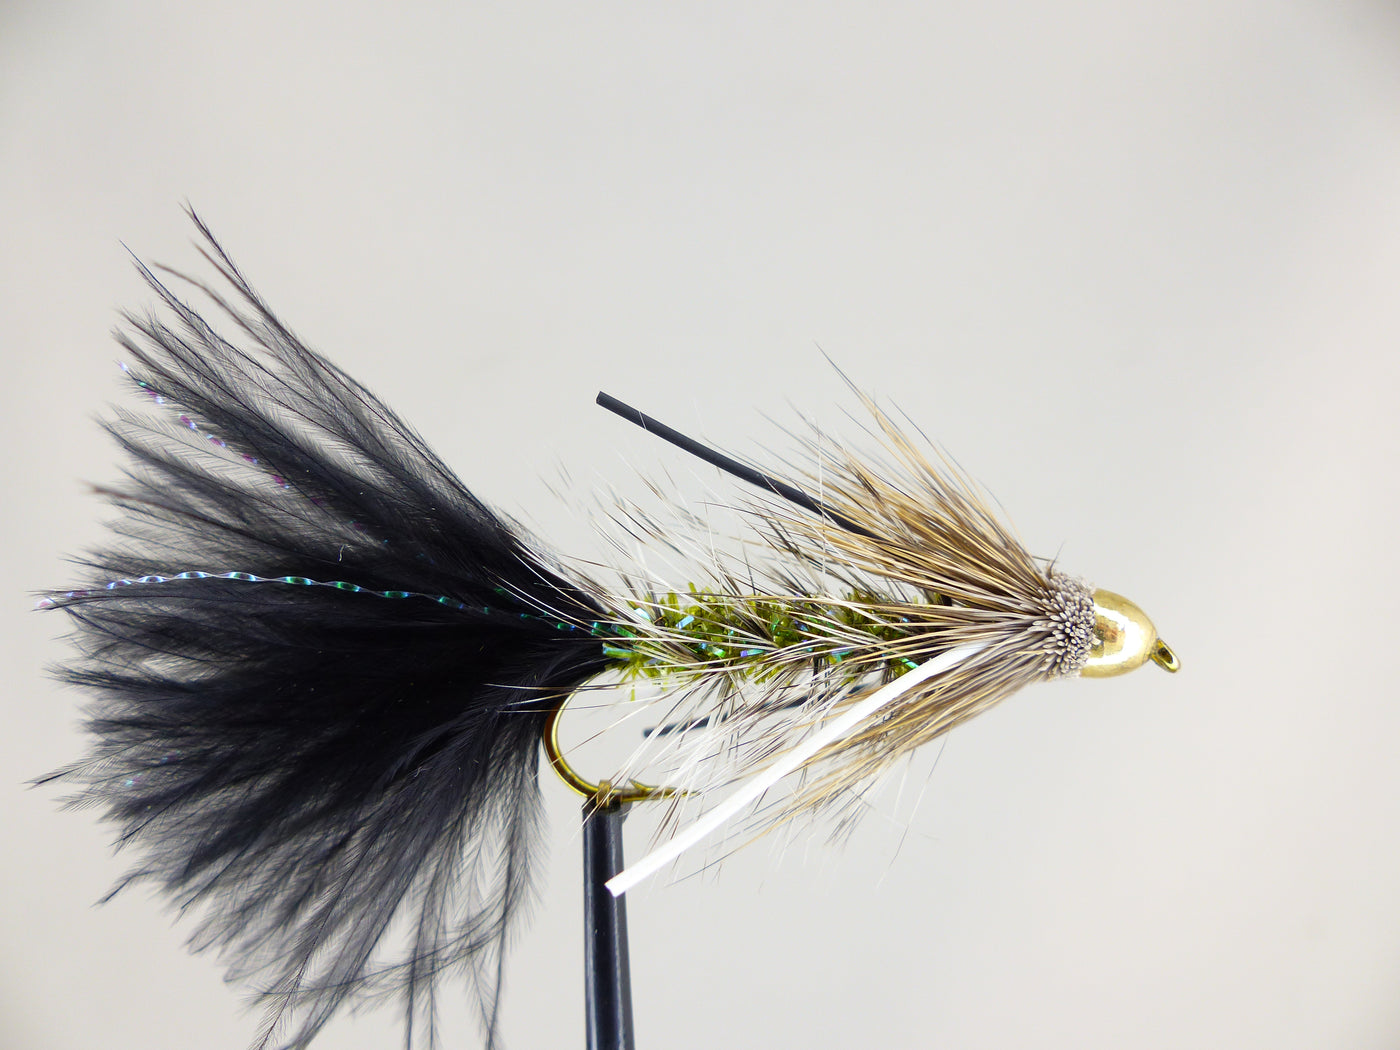 Black/Olive Conehead Bow River Bugger